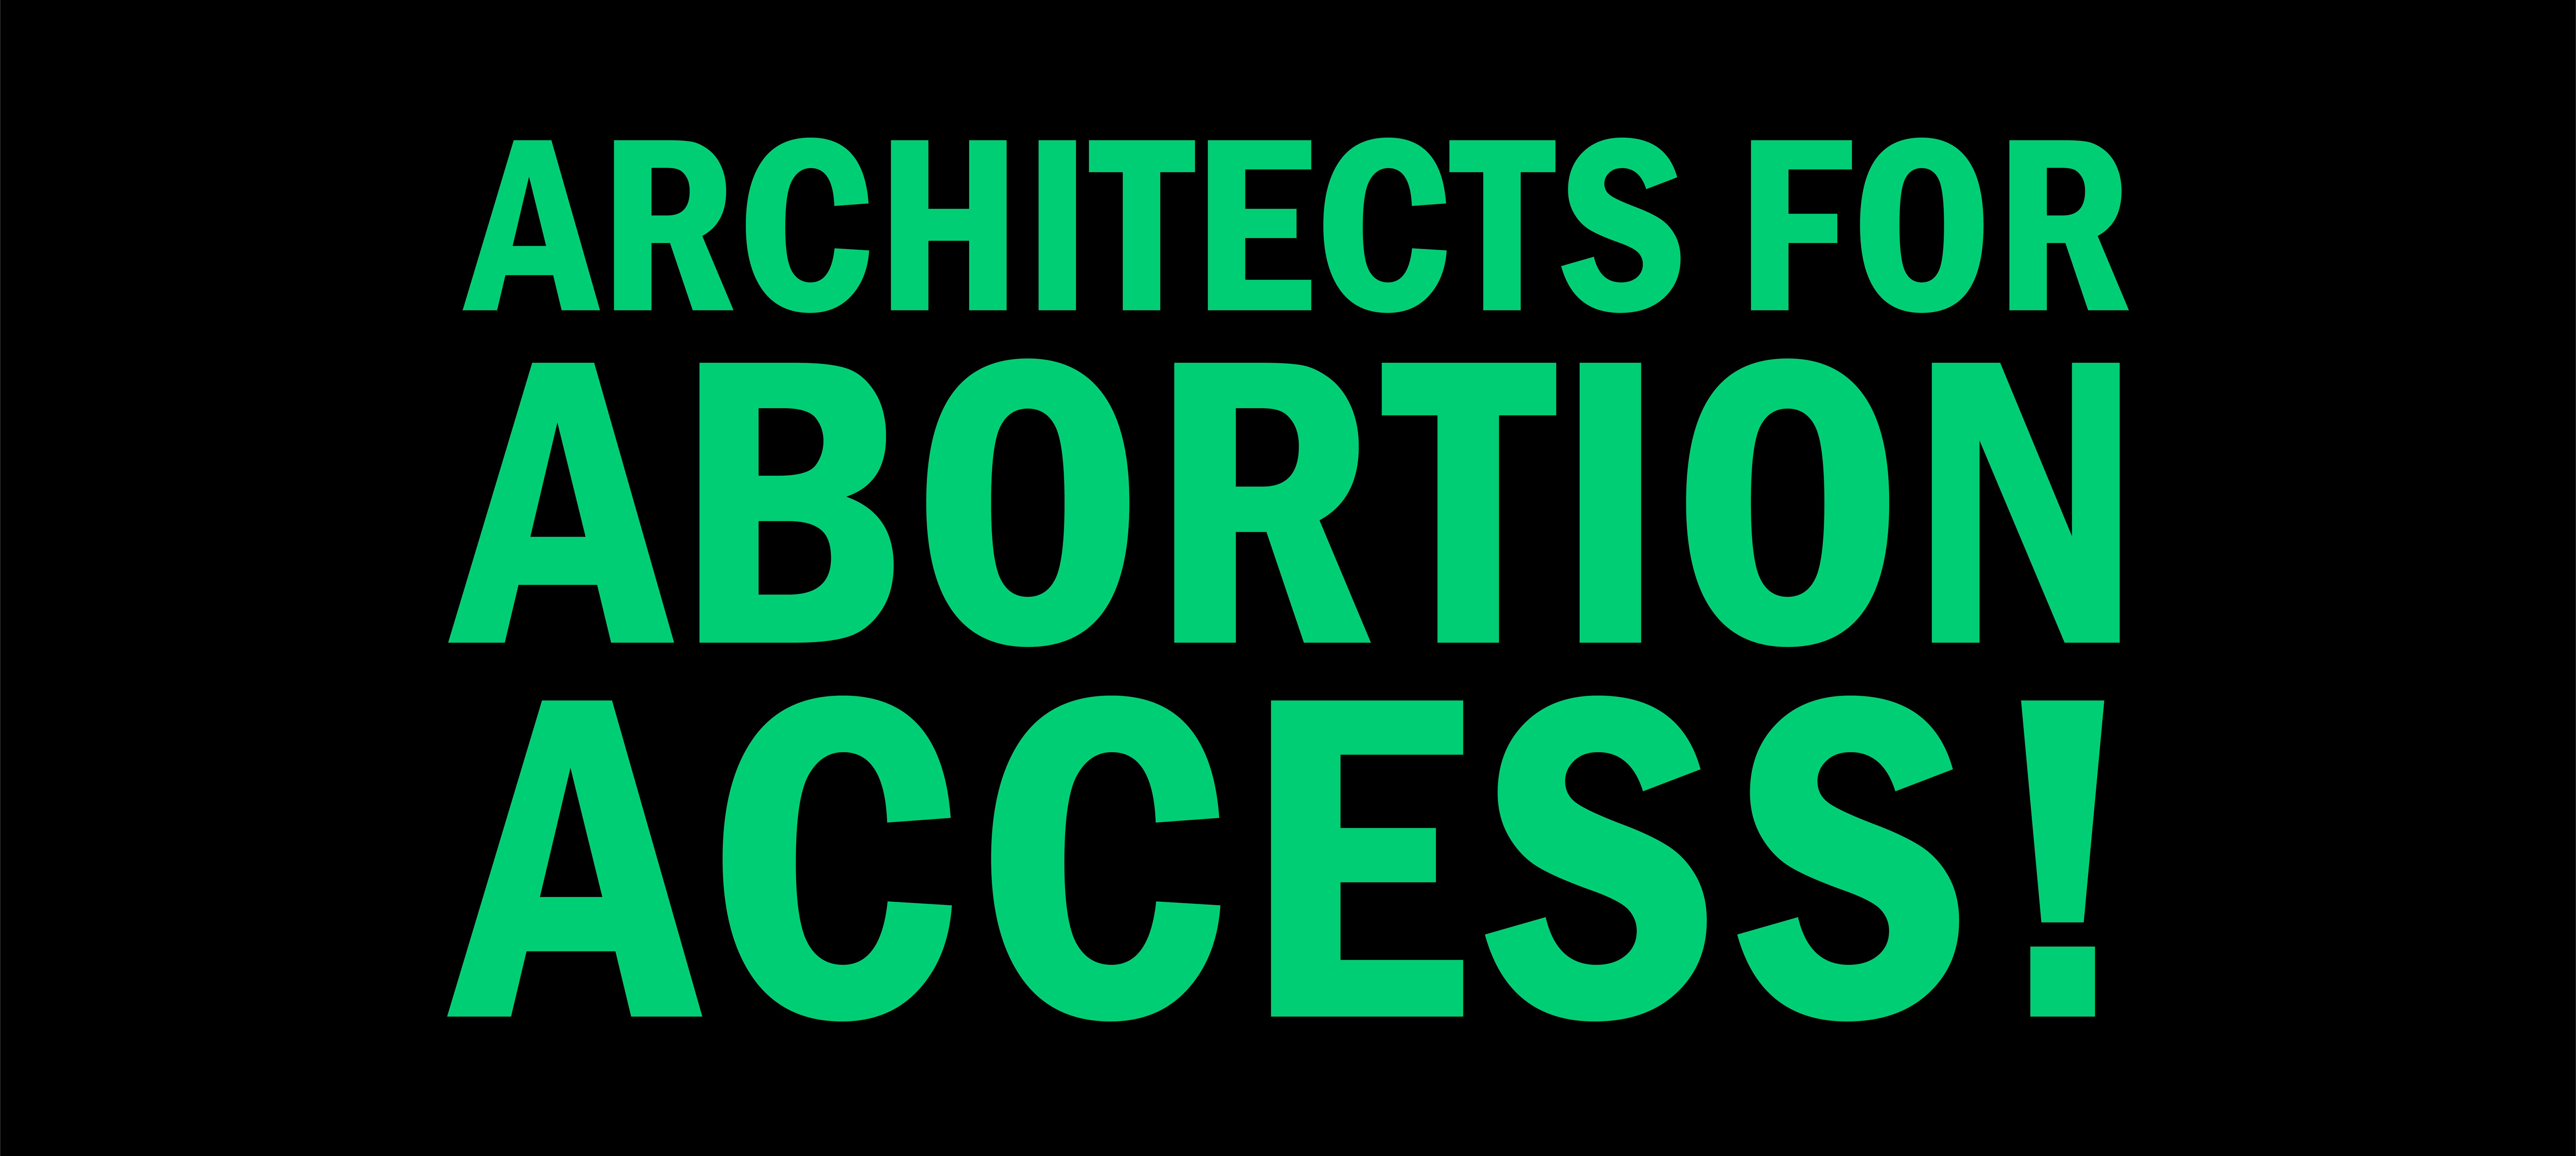 Architects for Abortion Access